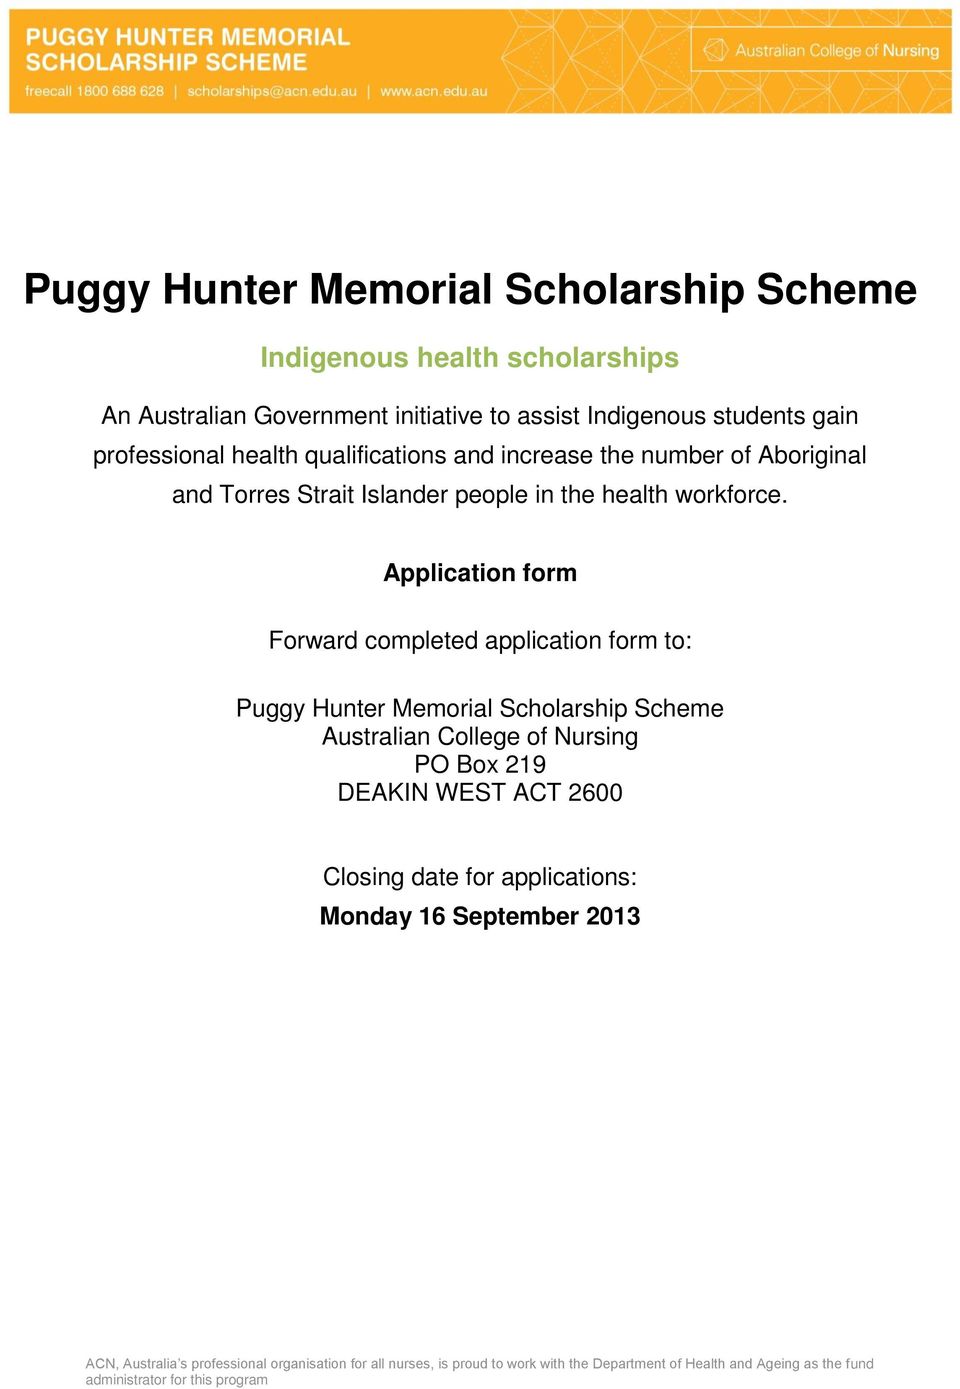 Application form Forward completed application form to: Puggy Hunter Memorial Scholarship Scheme Australian College of Nursing PO Box 219 DEAKIN WEST ACT 2600